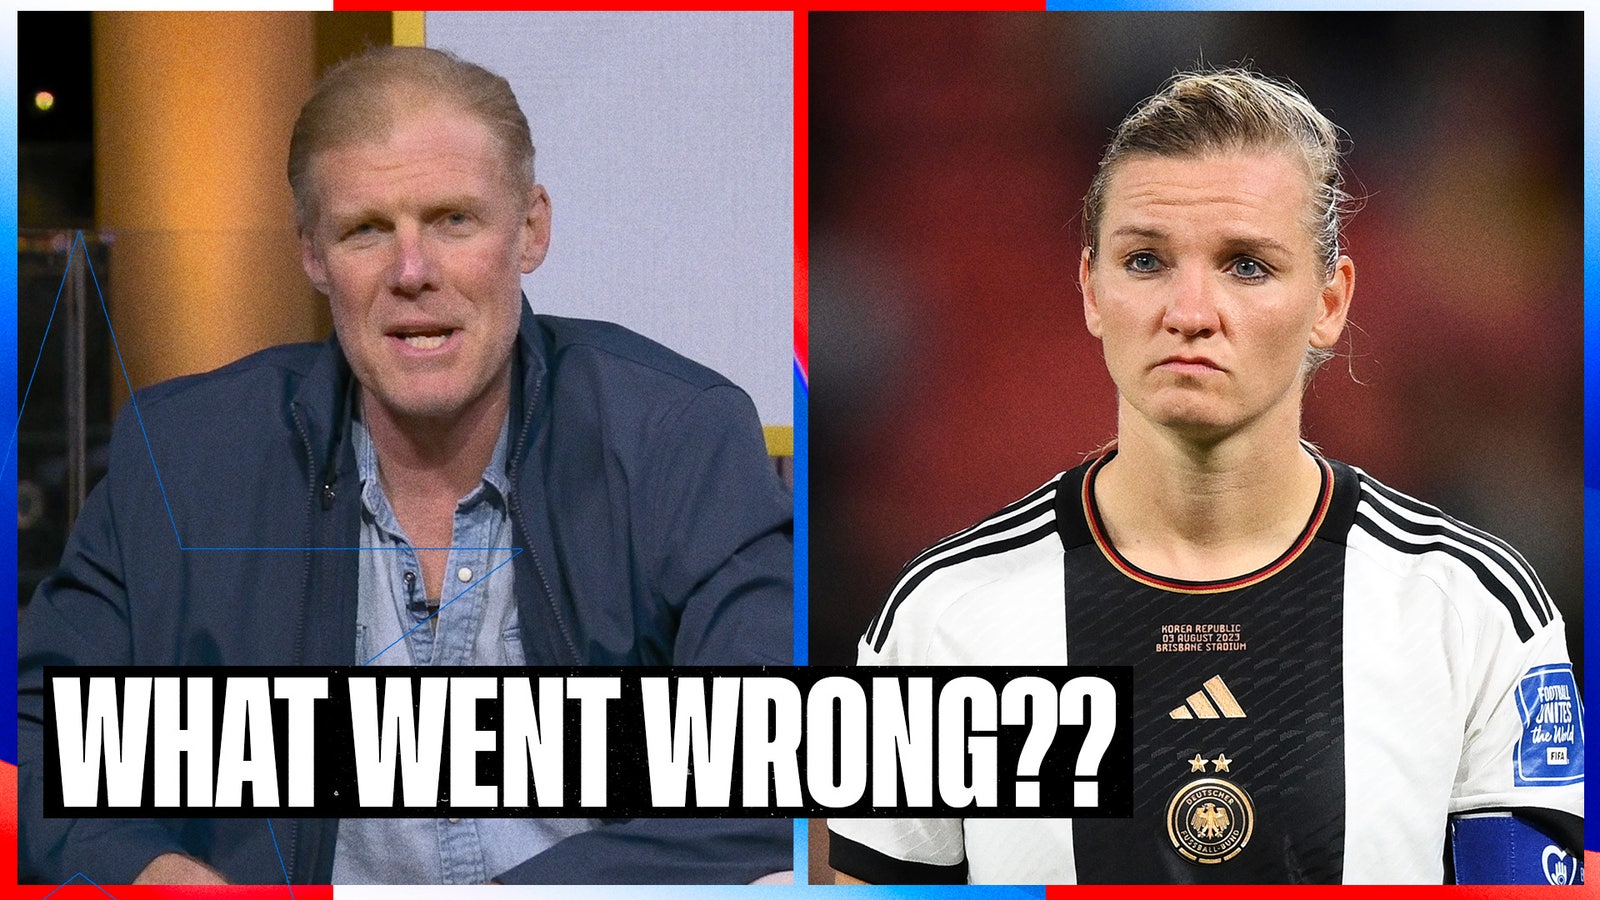 How SHOCKING is Germany's early exit from the World Cup?